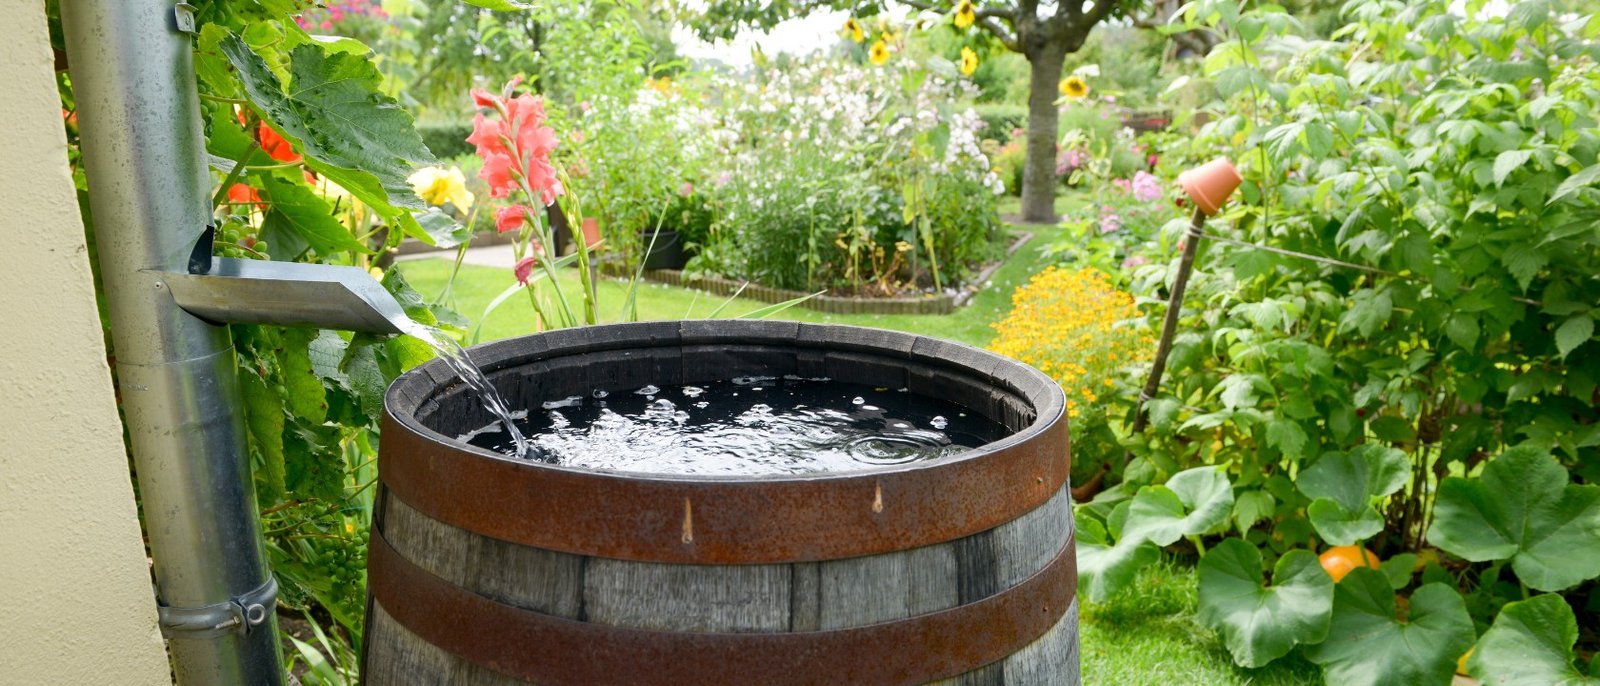 NEER-Maximize Your Water Efficiency with Smart Rain Water Harvesting Techniques